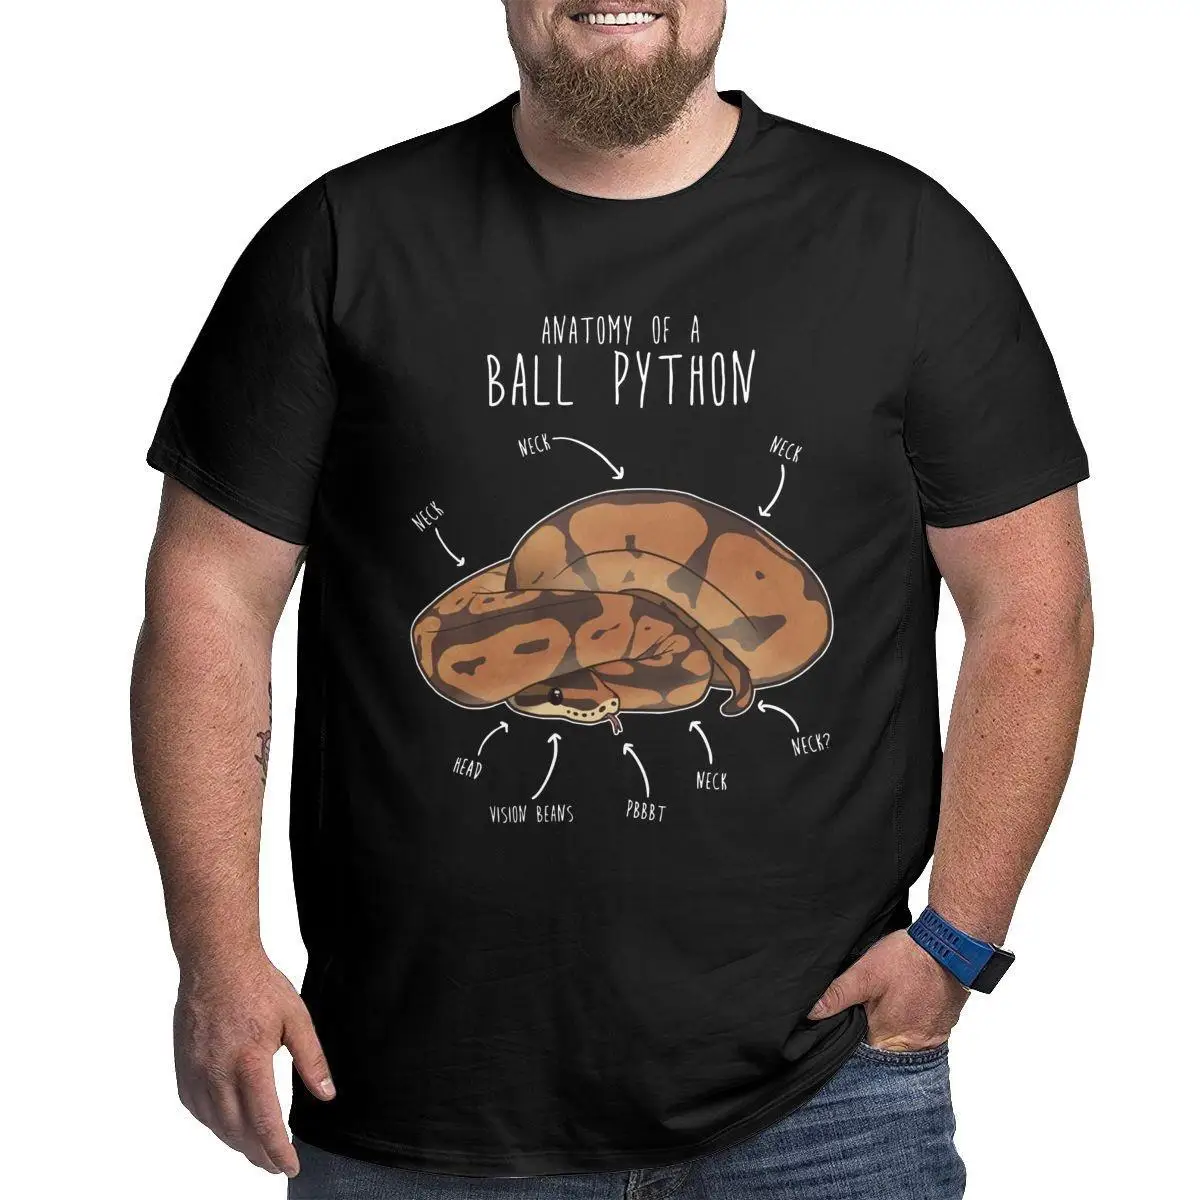 Anatomy Of A Ball Python T-Shirt for Men Crew Neck Pure Cotton T Shirts Snake Reptile Short Sleeve Big Tall Tee Shirt Plus Size